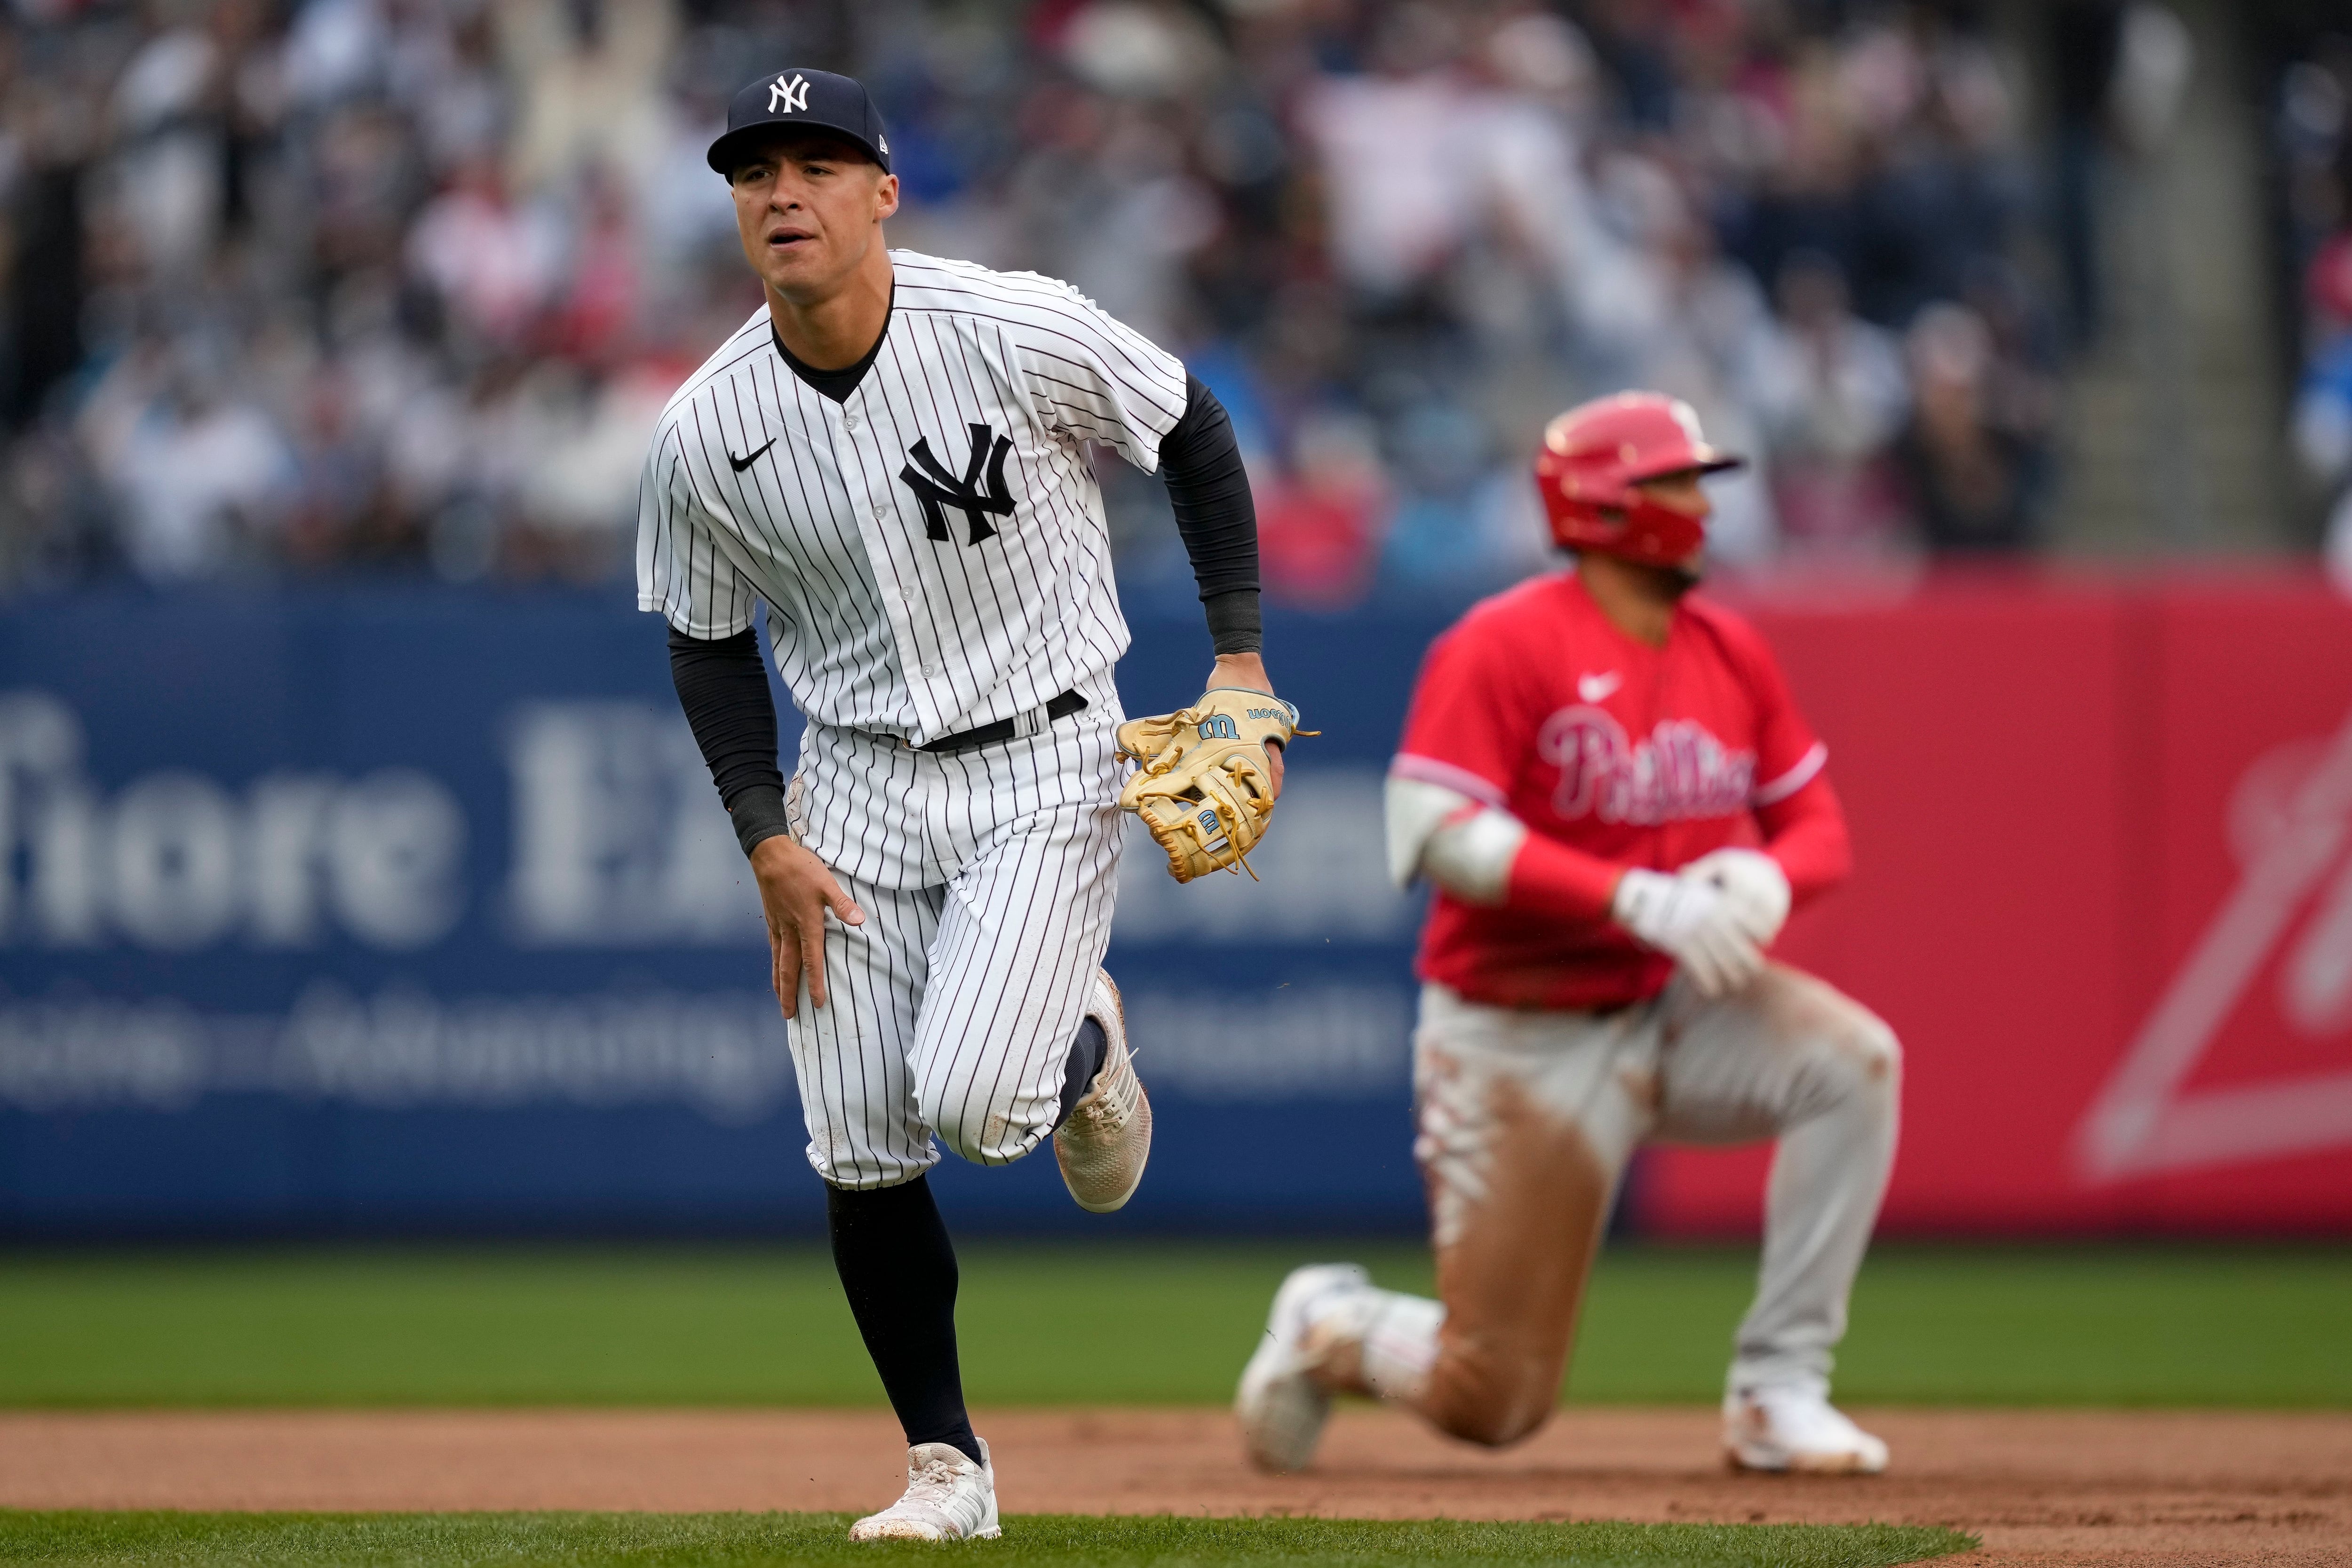 Yankees' Jose Trevino relived 'special' day at son's schools